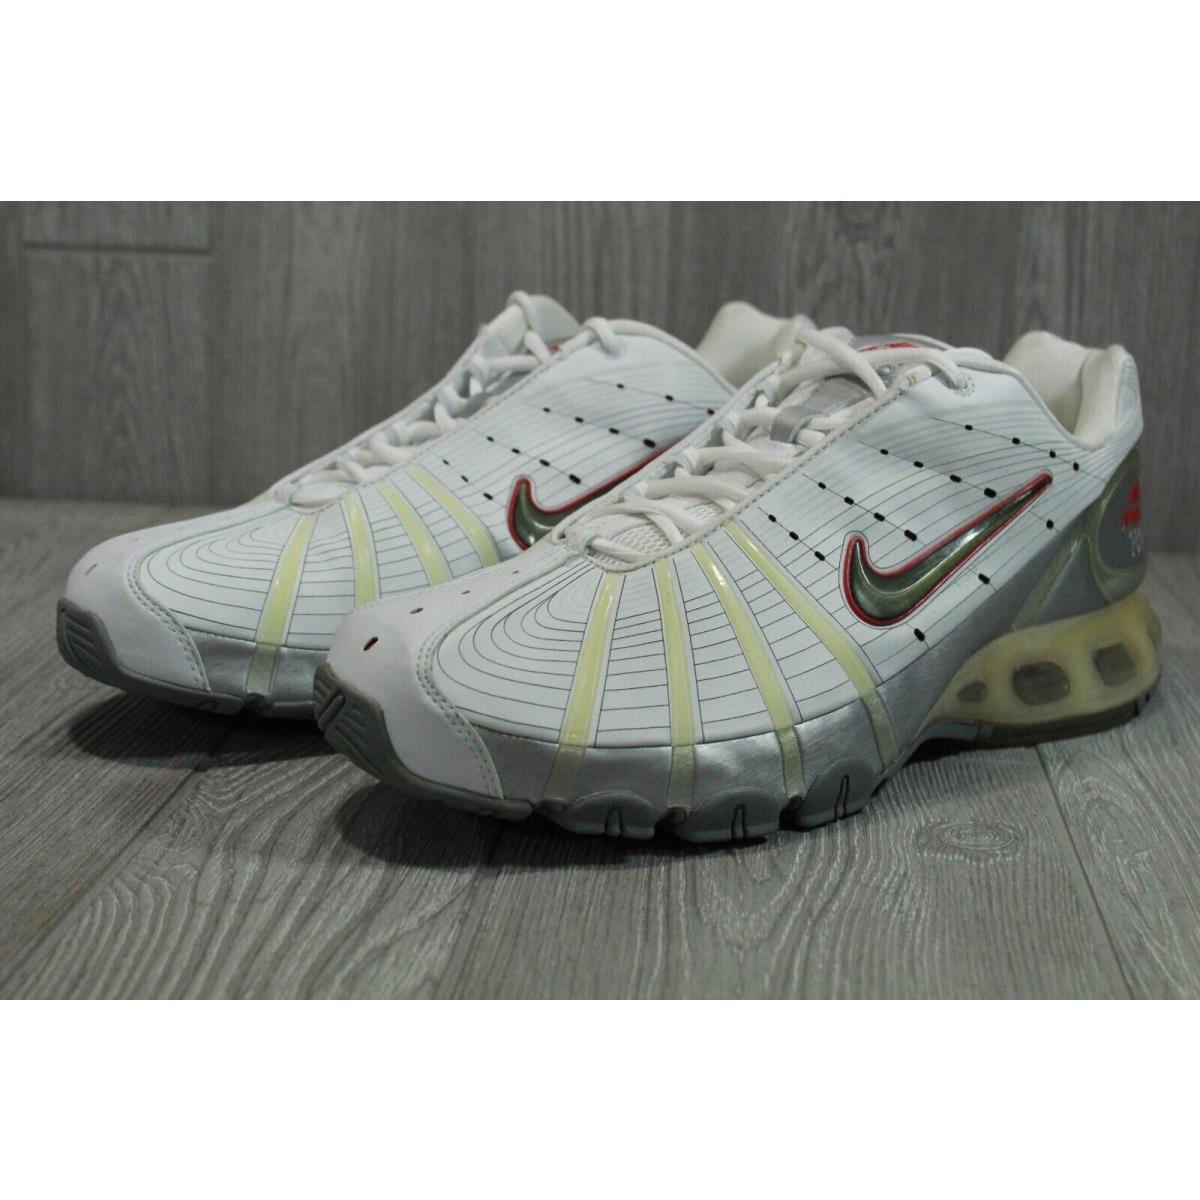 Vintage Nike Air Max 180 TR White Trainer Shoes 2006 Mens 13 Oss | - Nike shoes Air Max - Silver |